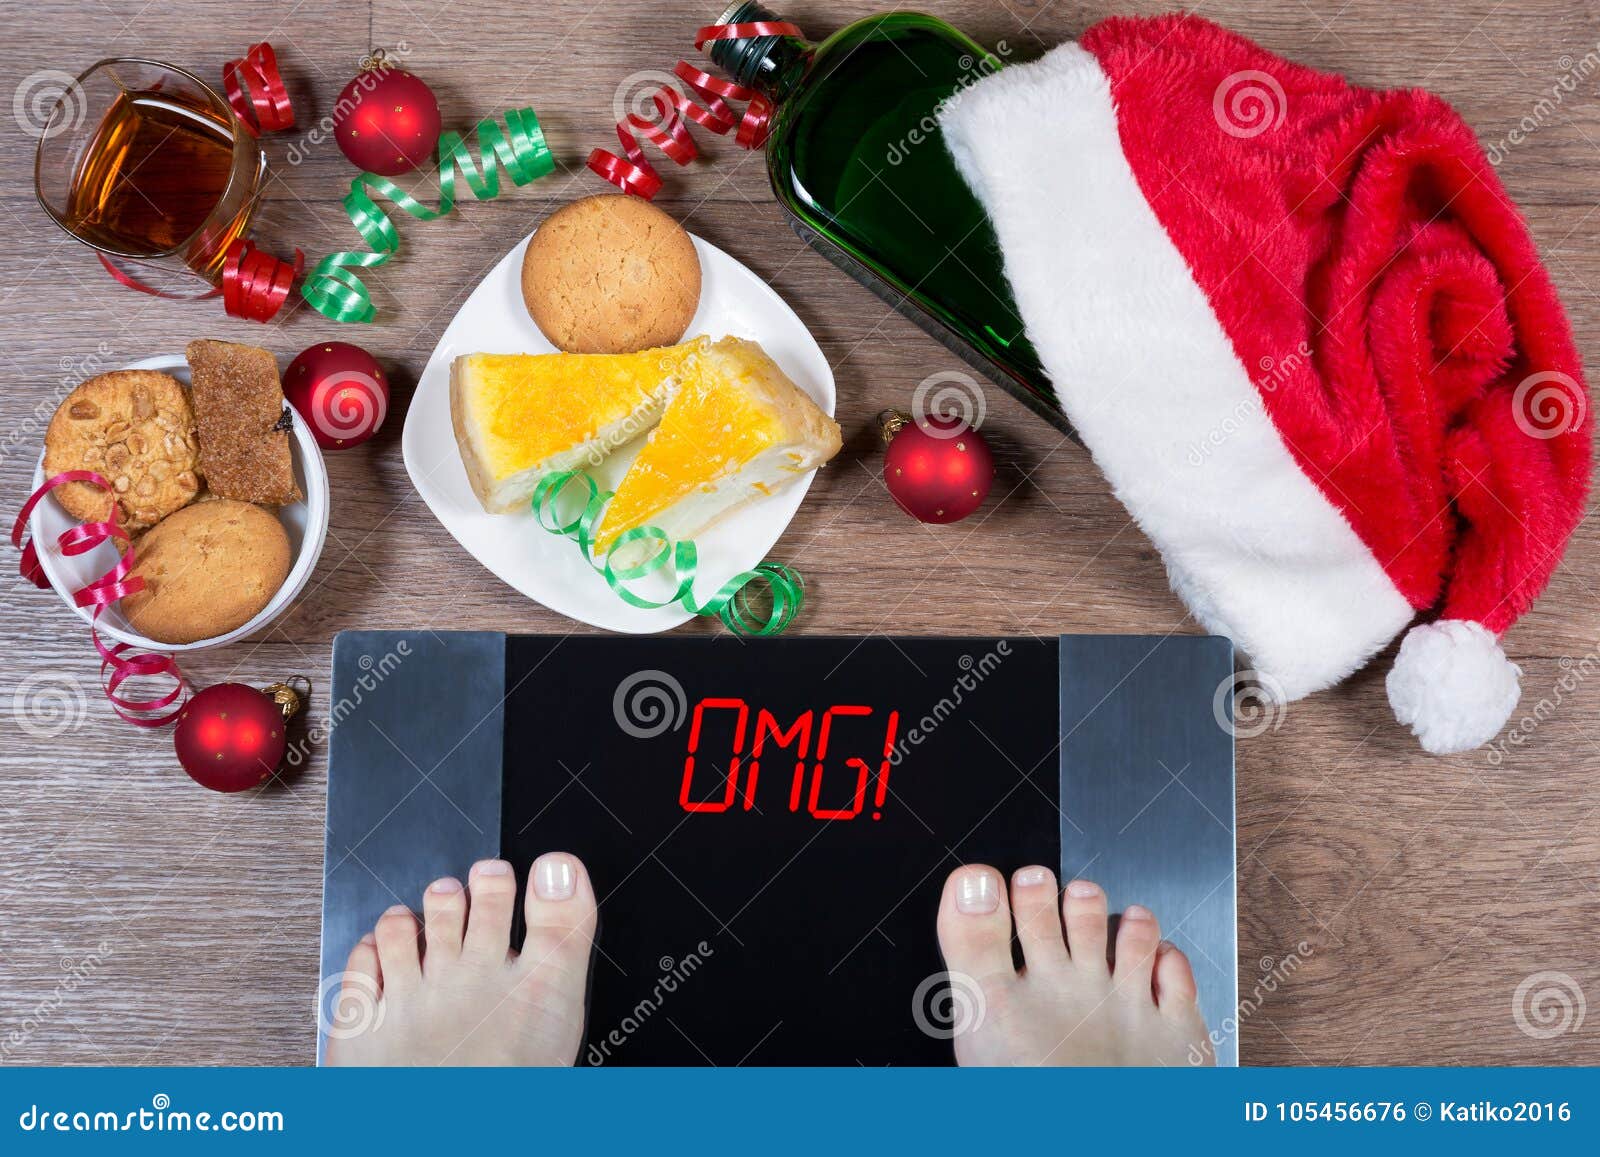 female feet on digital scales with sign omg! surrounded by christmas decorations, bottle, glass of alcohol and sweets.